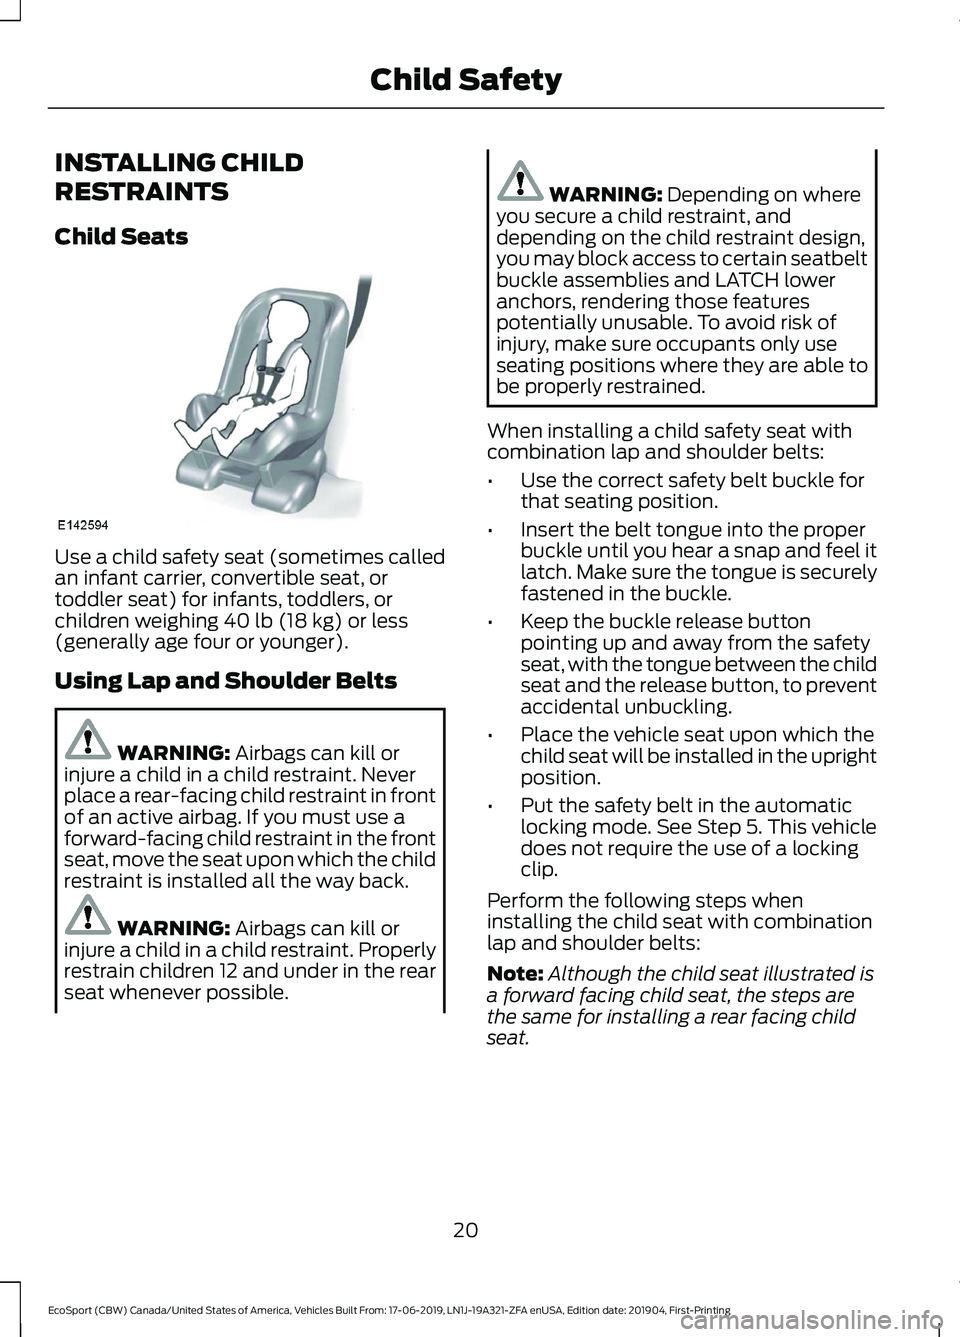 FORD ECOSPORT 2020  Owners Manual INSTALLING CHILD
RESTRAINTS
Child Seats
Use a child safety seat (sometimes calledan infant carrier, convertible seat, ortoddler seat) for infants, toddlers, orchildren weighing 40 lb (18 kg) or less(g